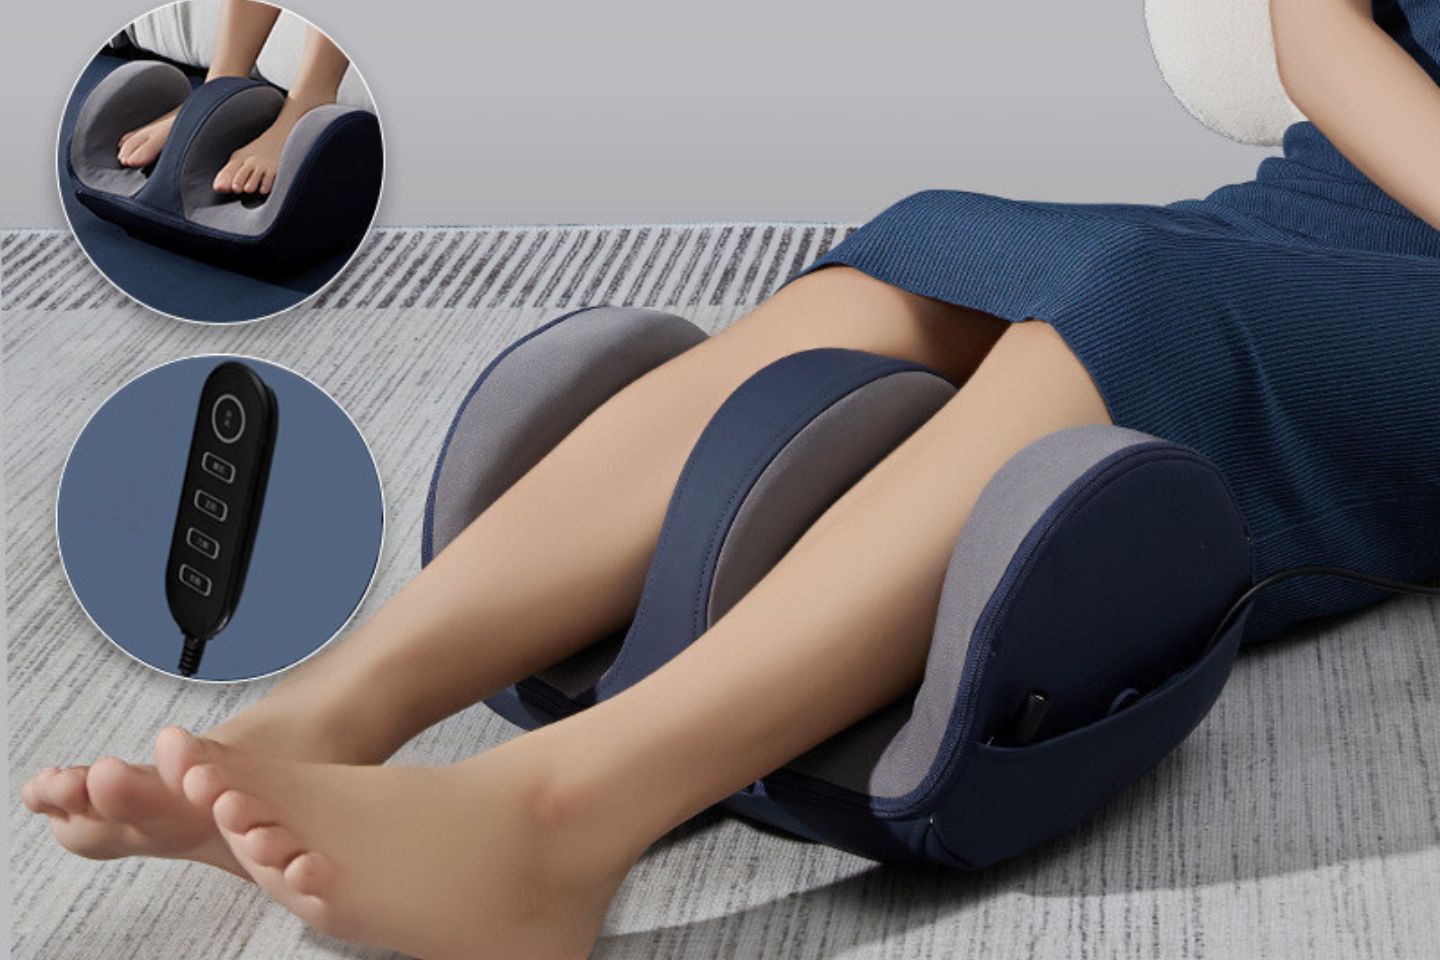 The Benefits of Using Foot Massagers